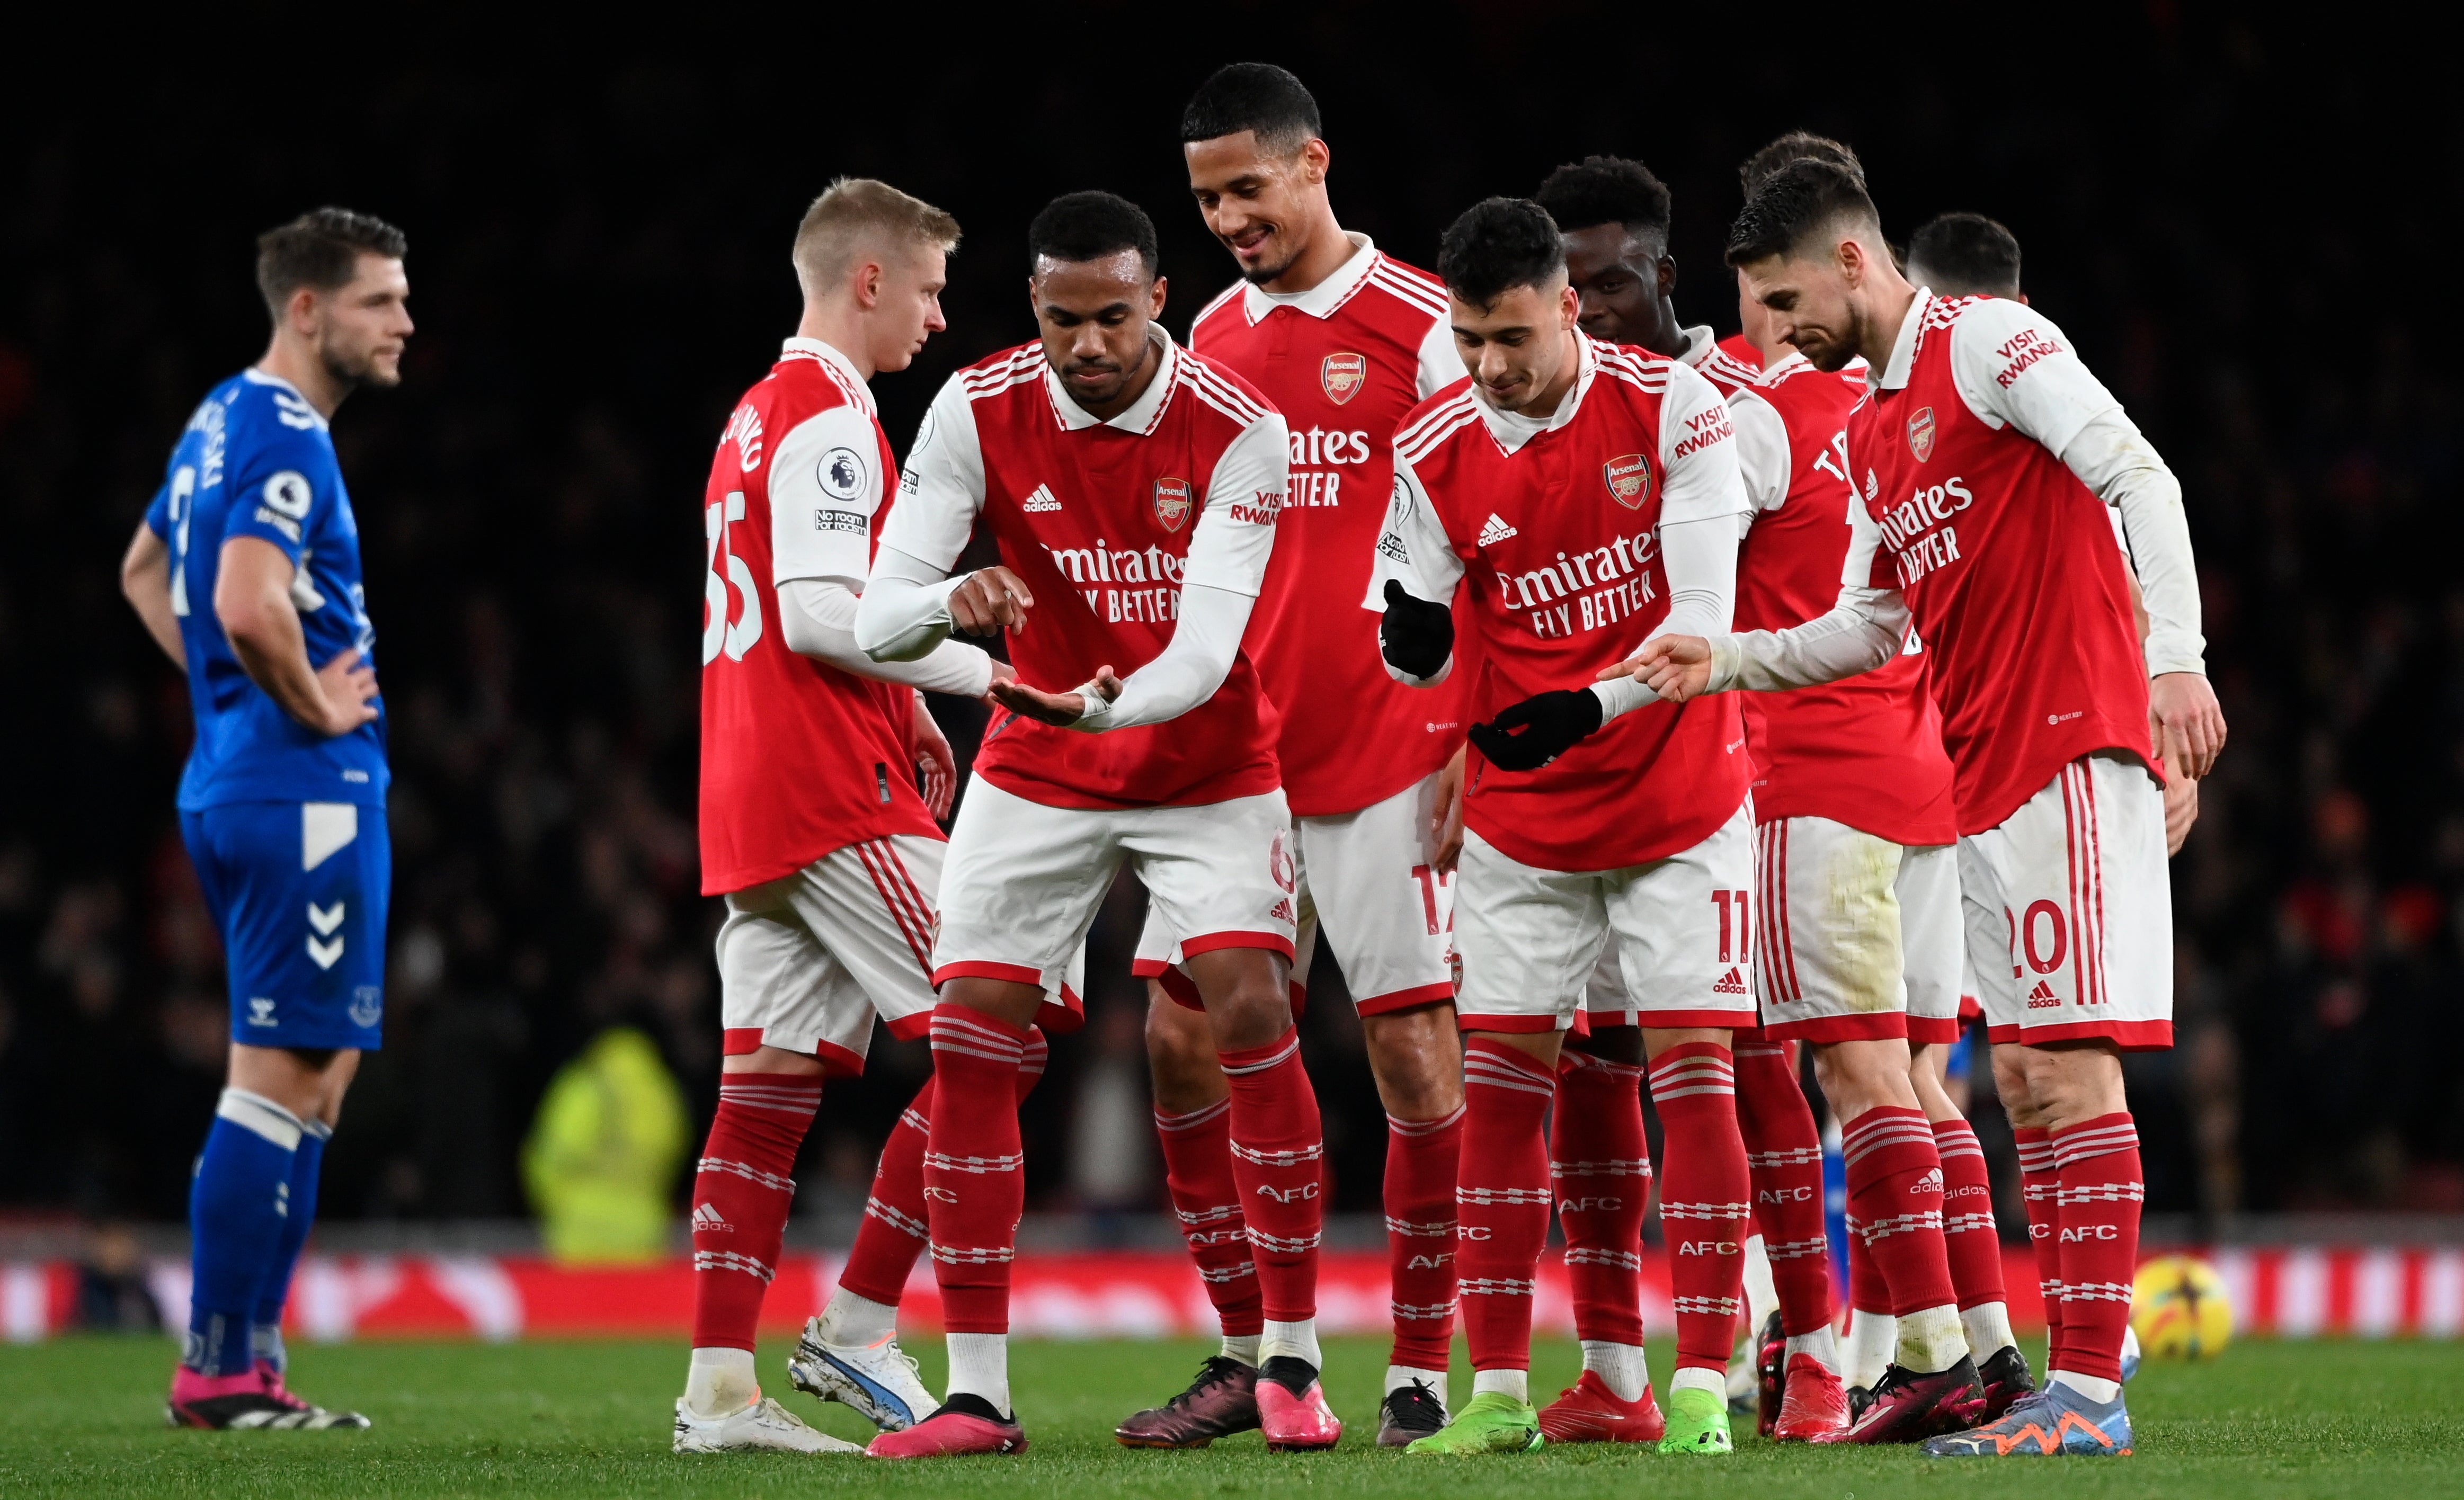 Arsenal could celebrate a dominant win over Everton